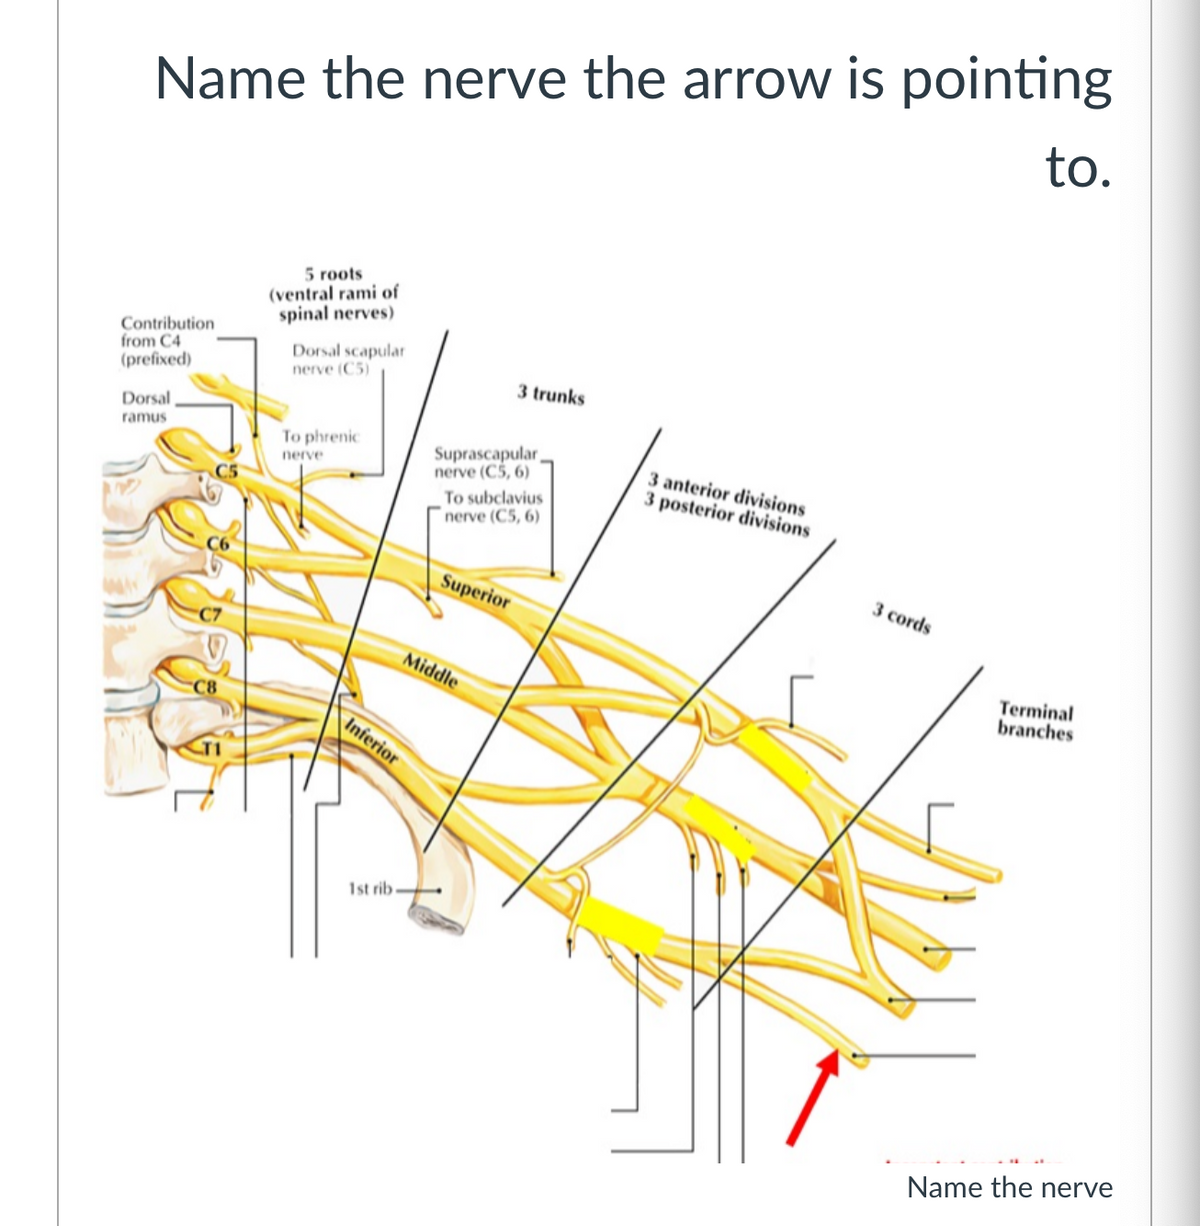 Name the nerve the arrow is pointing
to.
5 roots
(ventral rami of
spinal nerves)
Contribution
from C4
(prefixed)
Dorsal scapular
nerve (C5)
3 trunks
Dorsal
ramus
Suprascapular,
nerve (C5, 6)
To phrenic
3 anterior divisions
3 posterior divisions
nerve
To subclavius
nerve (C5, 6)
Superior
3 cords
Middle
Terminal
branches
C8
Inferior
1st rib
Name the nerve
